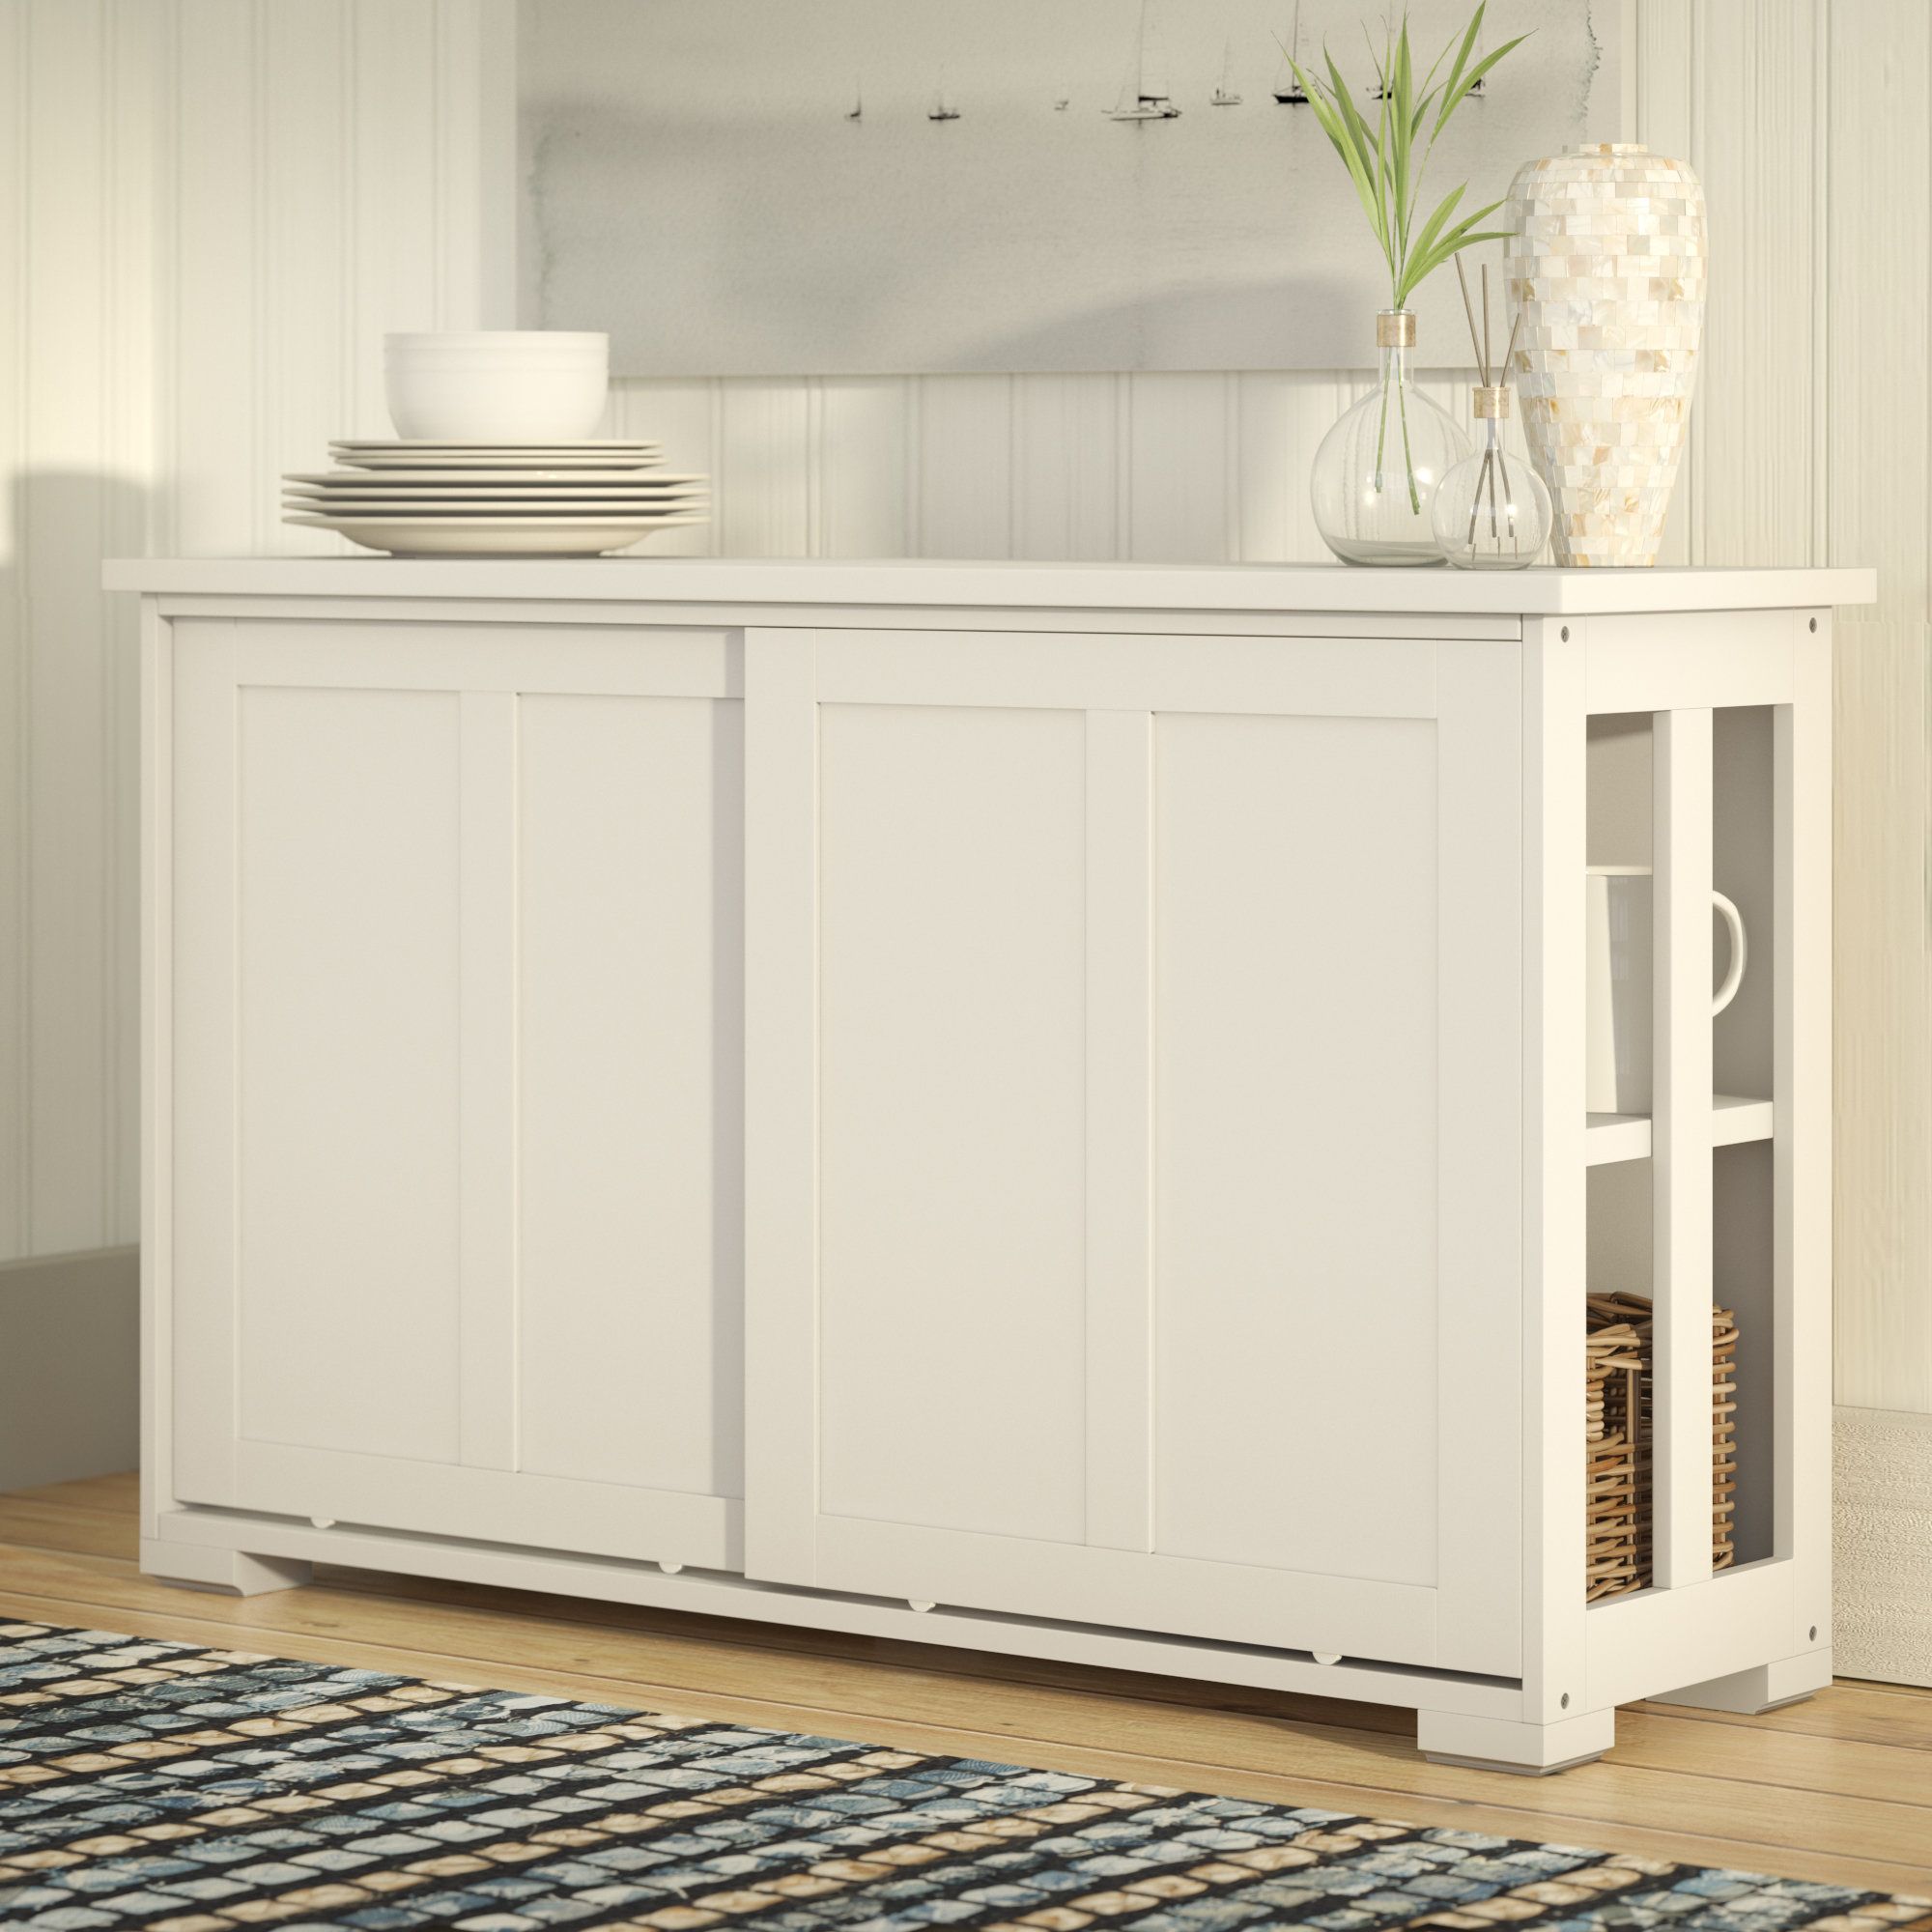 Beachcrest Home South Miami Sideboard & Reviews | Wayfair (View 1 of 20)